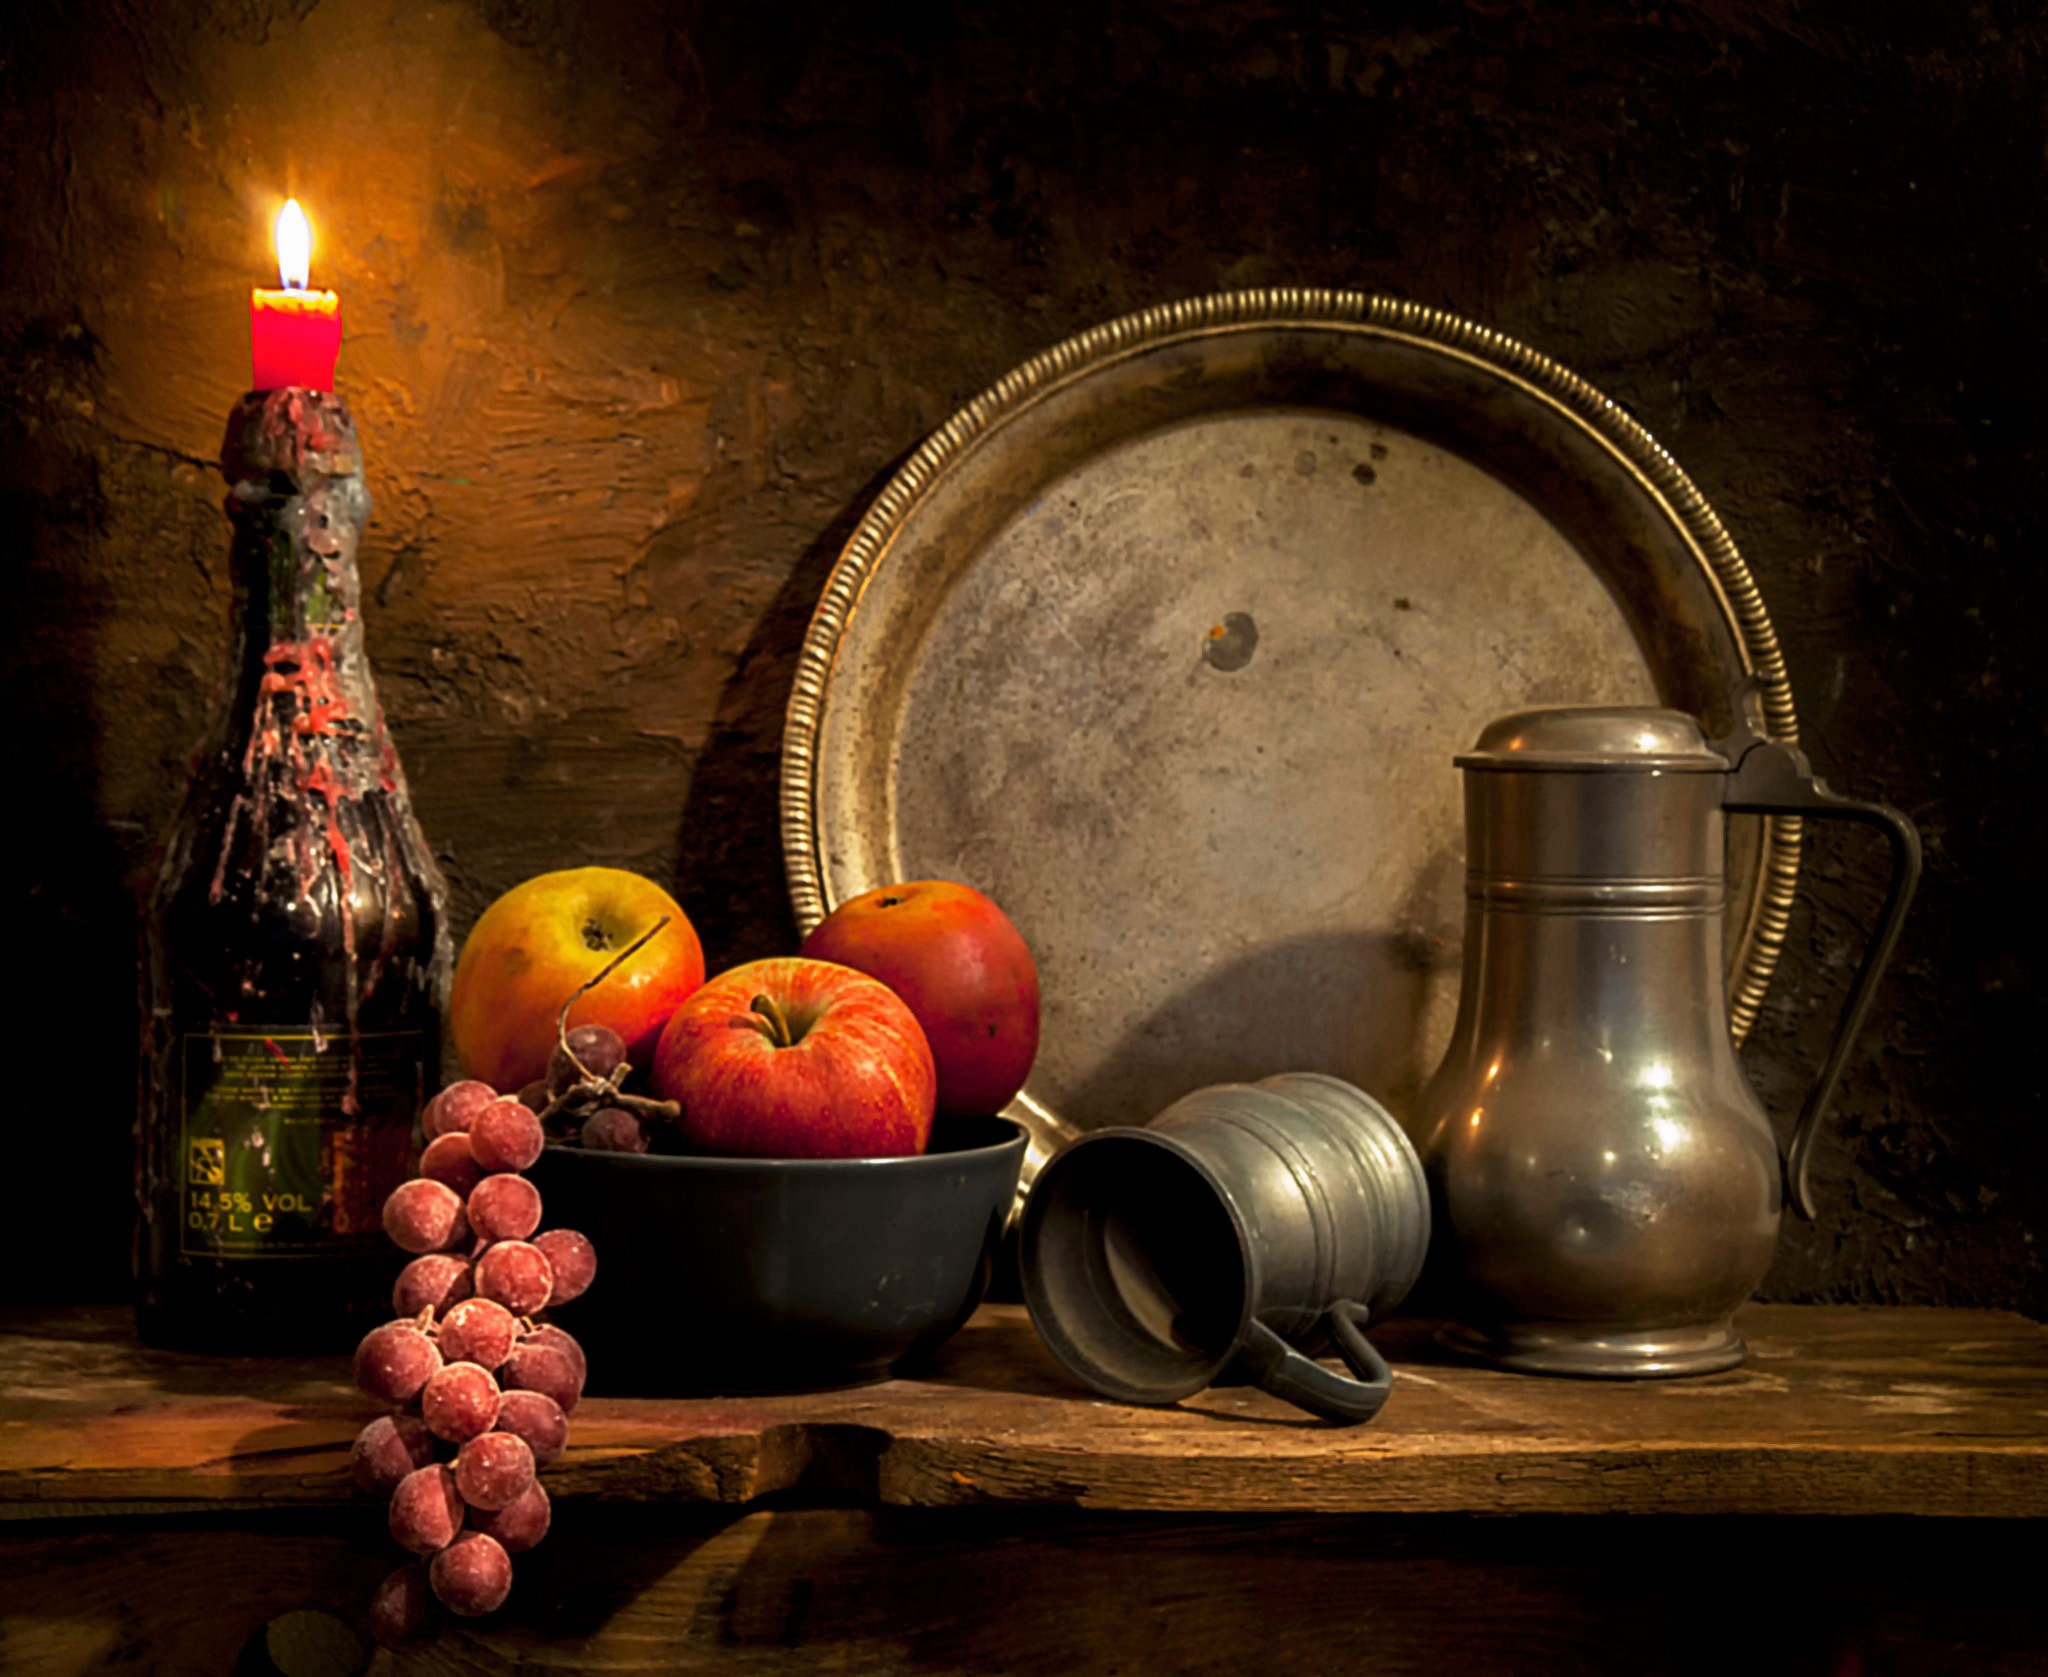 photography, still life, bottle, candle, cup, fruit, plate